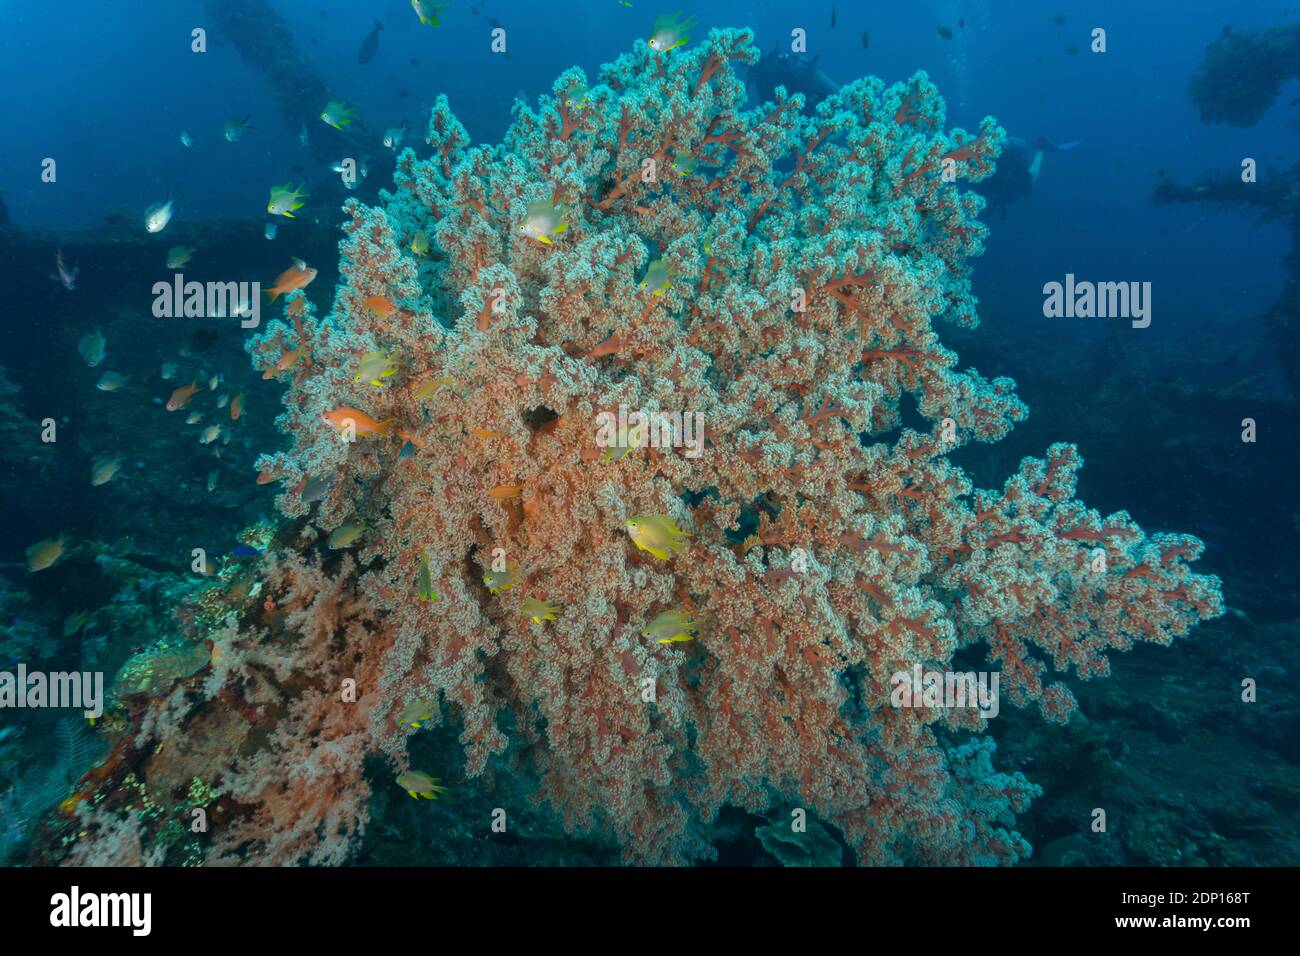 Colourful Soft Coral in Bali's Underwater World (Photographed during ...